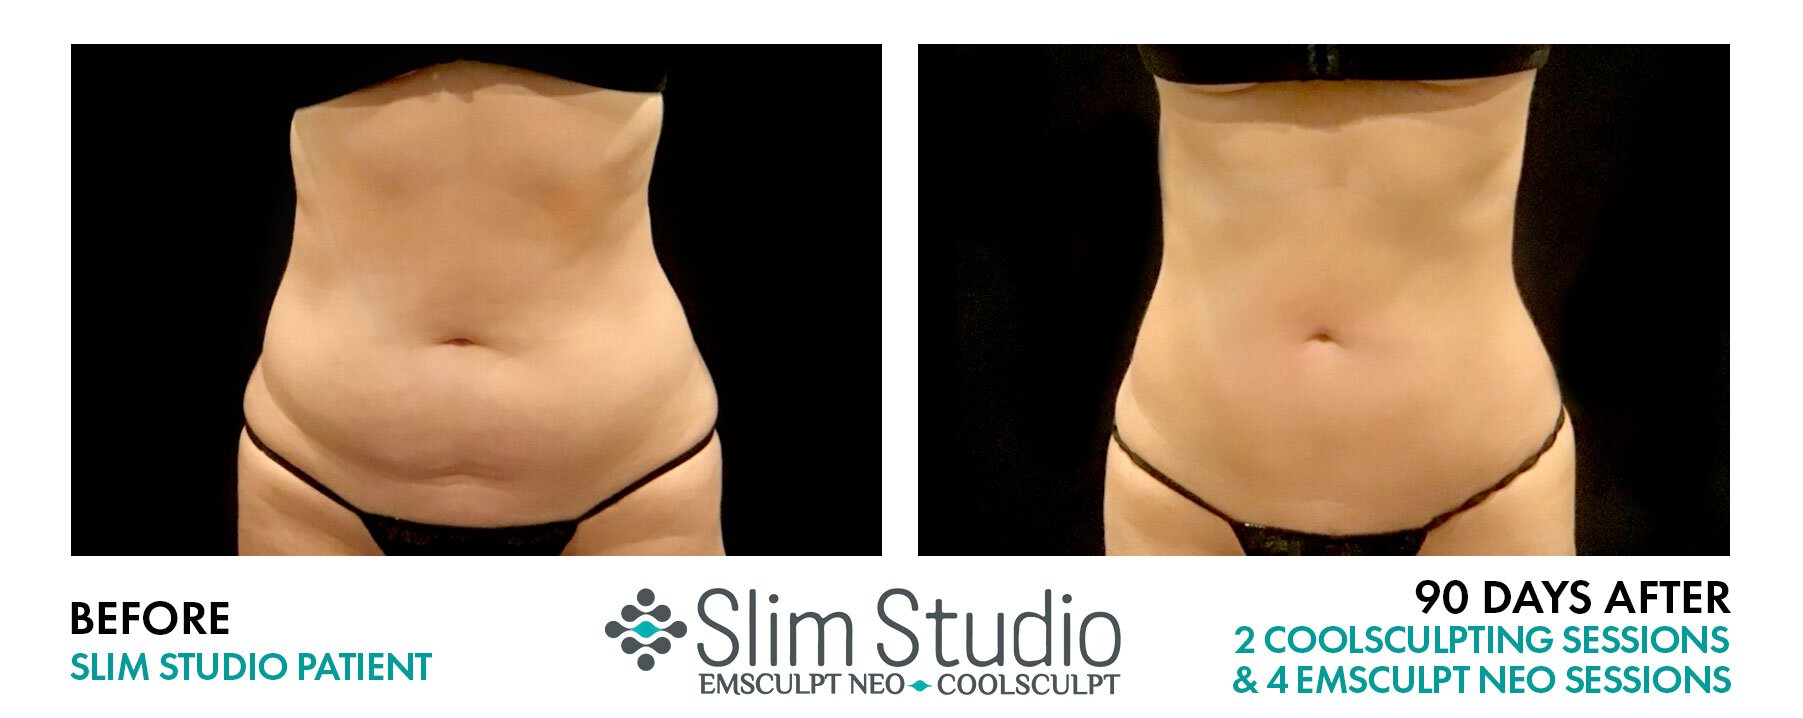 Awesome Results on Abs from Slim Studio CoolSculpting